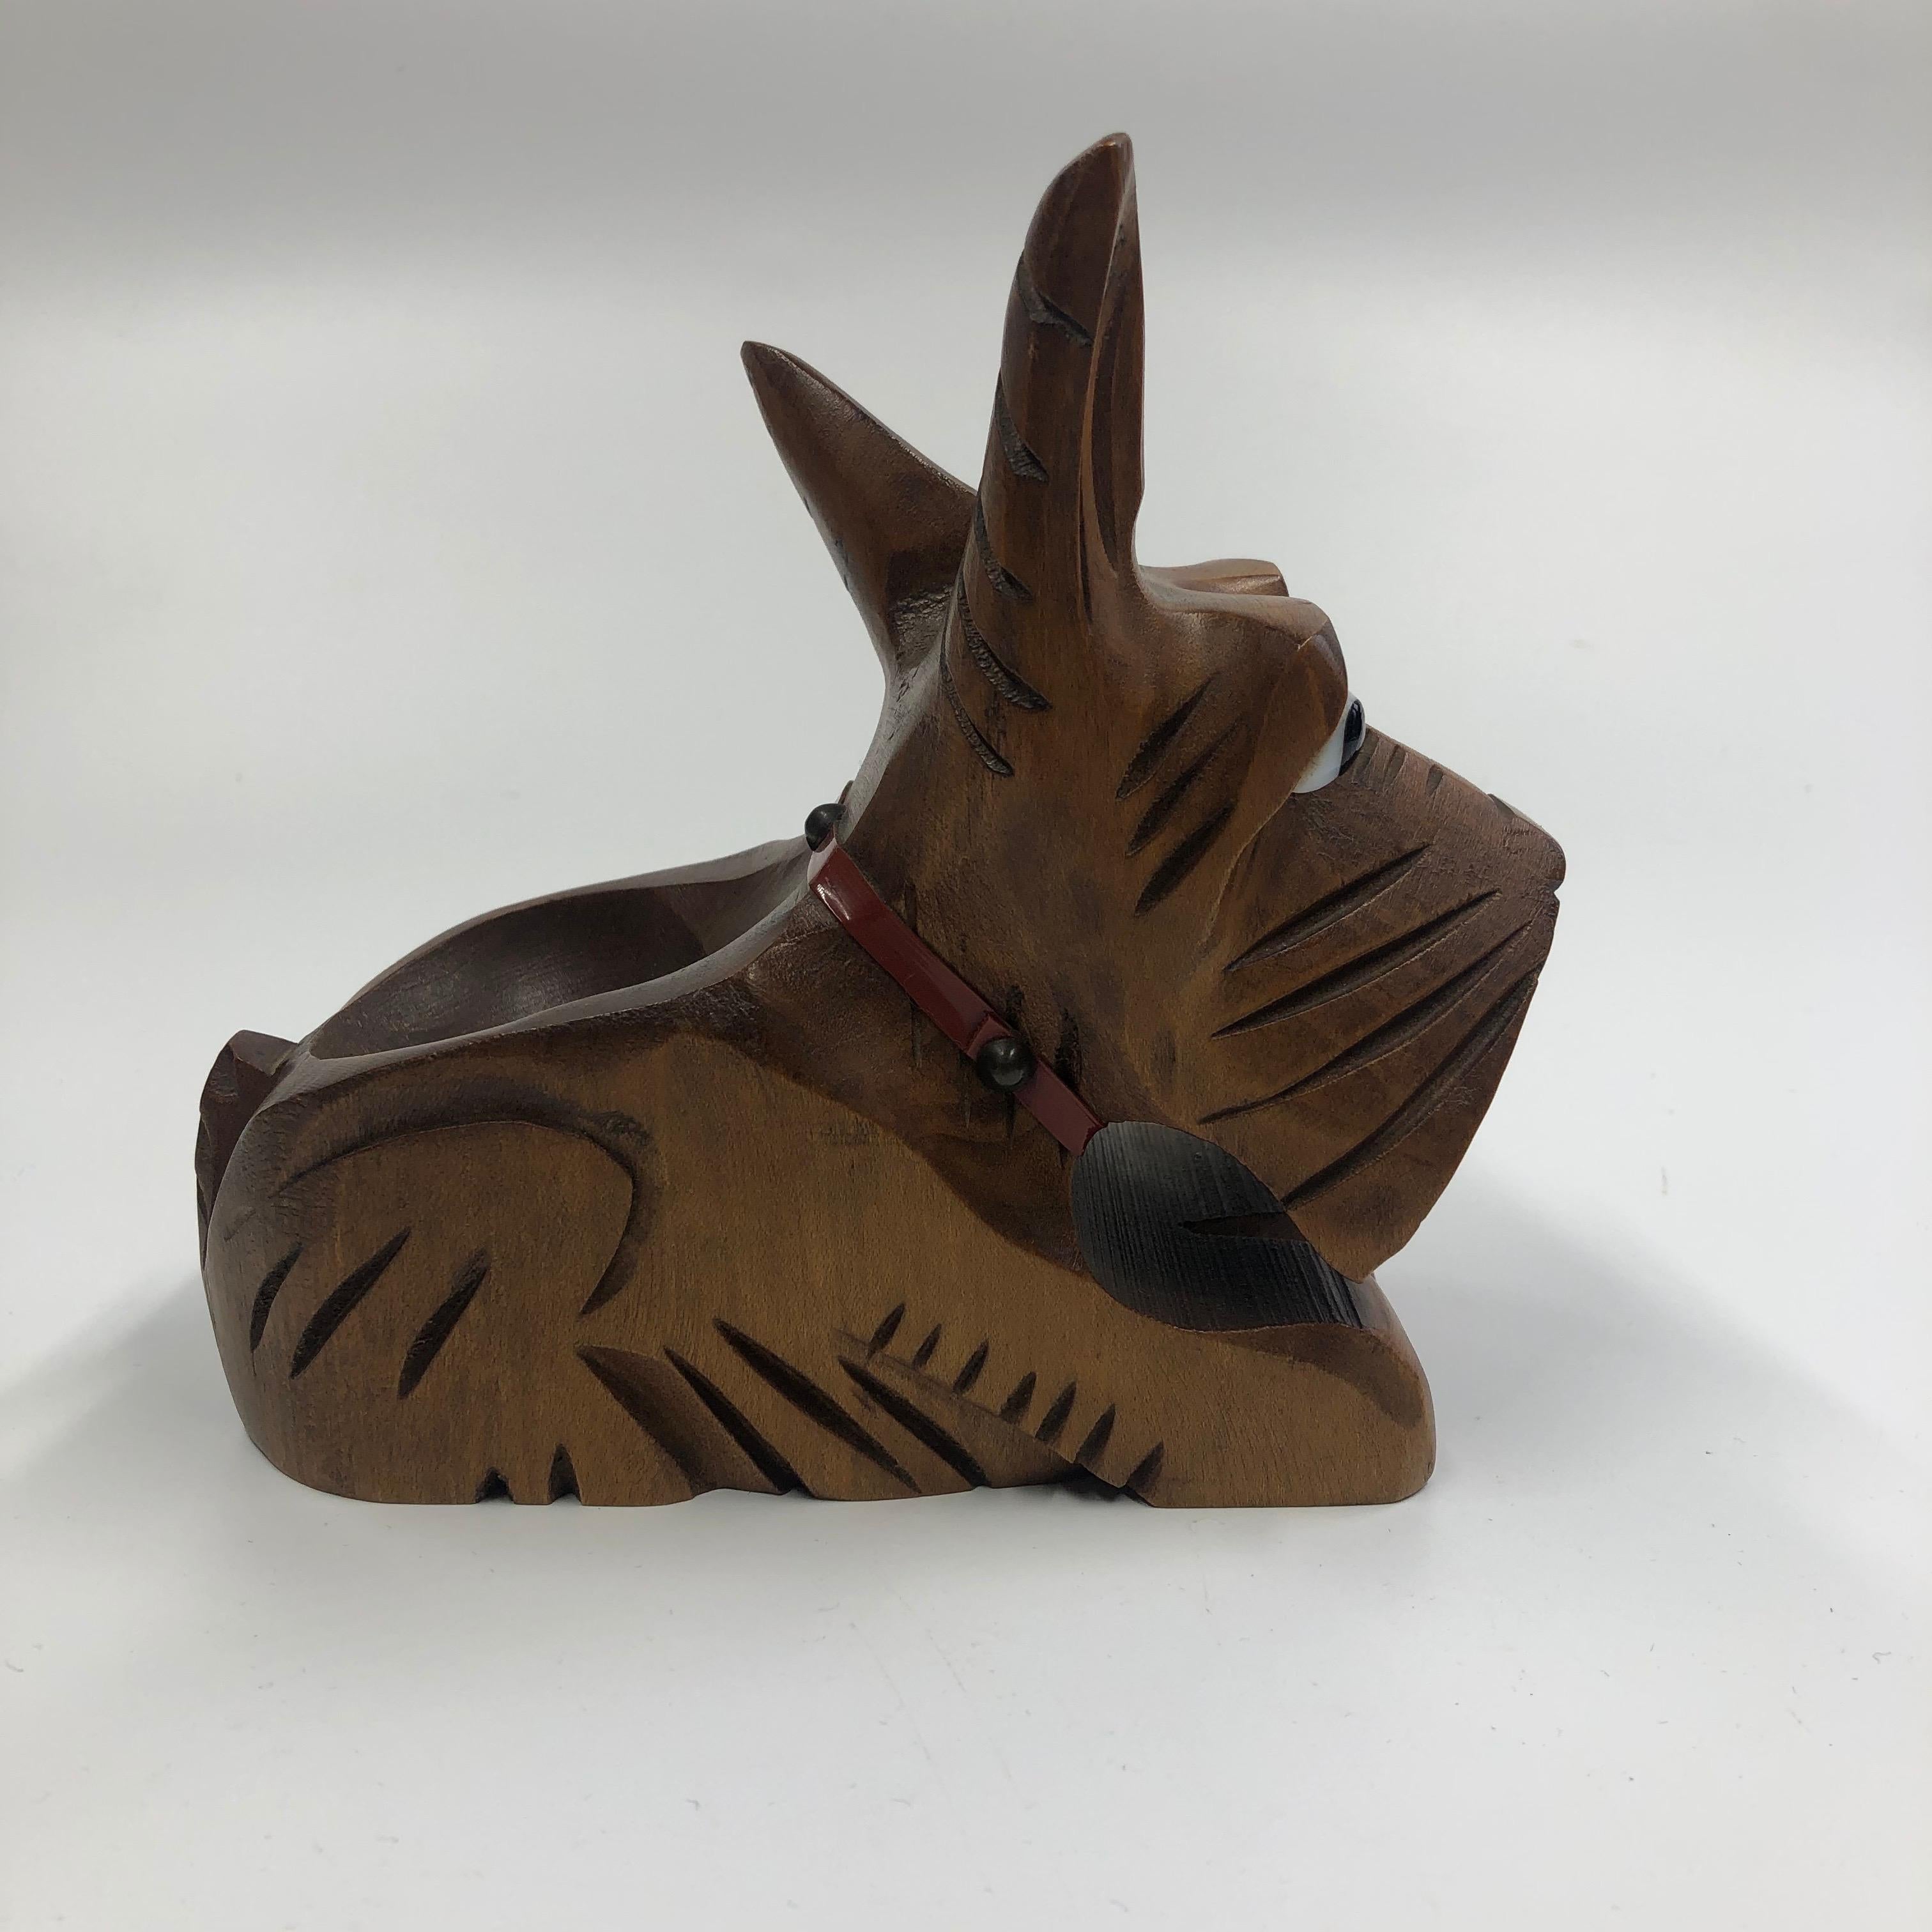 Midcentury carved wooden Scottish terrier pipe holder, France, 1950s.
The pipe holder is in excellent condition.
Measurements:
Length 15 cm
Height 13
Depth 6.